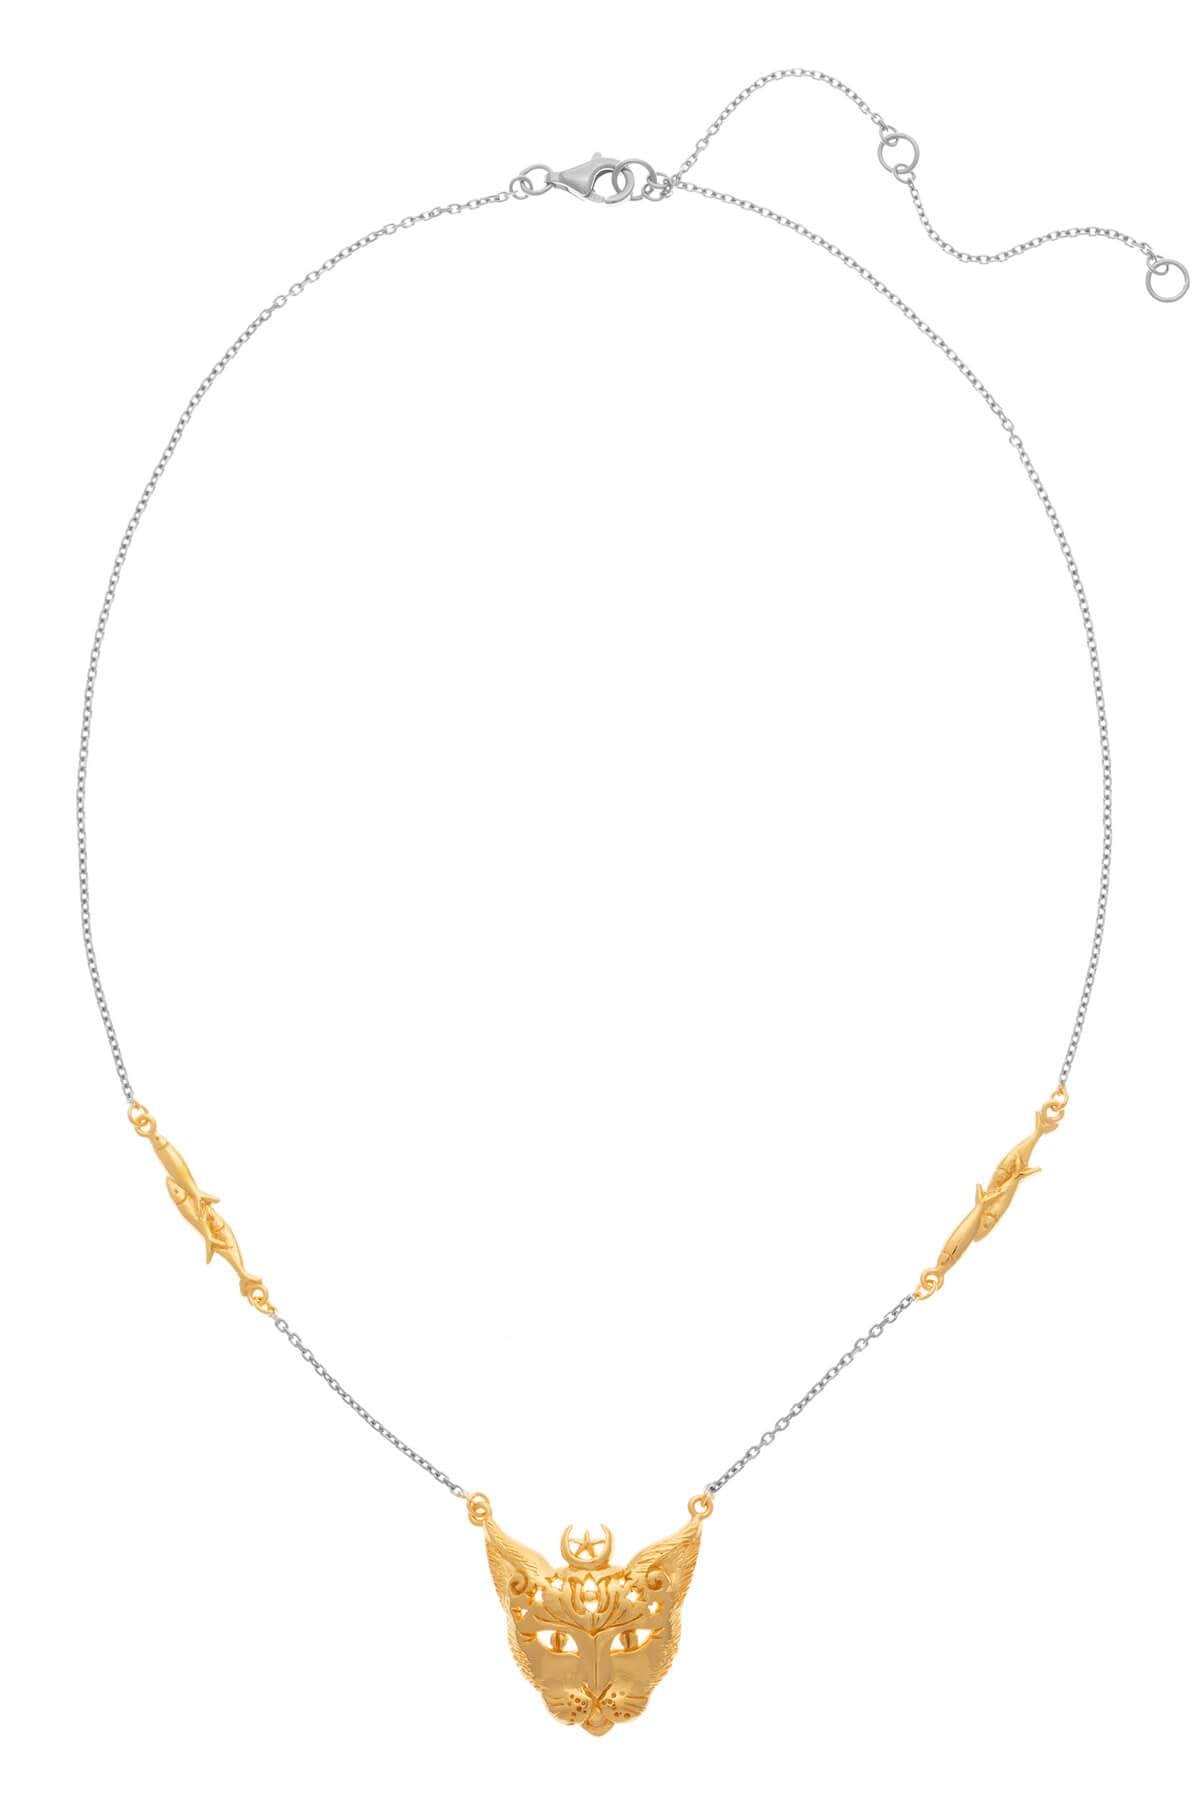 Bastet Goddess necklace. Silver, partly gold-plated